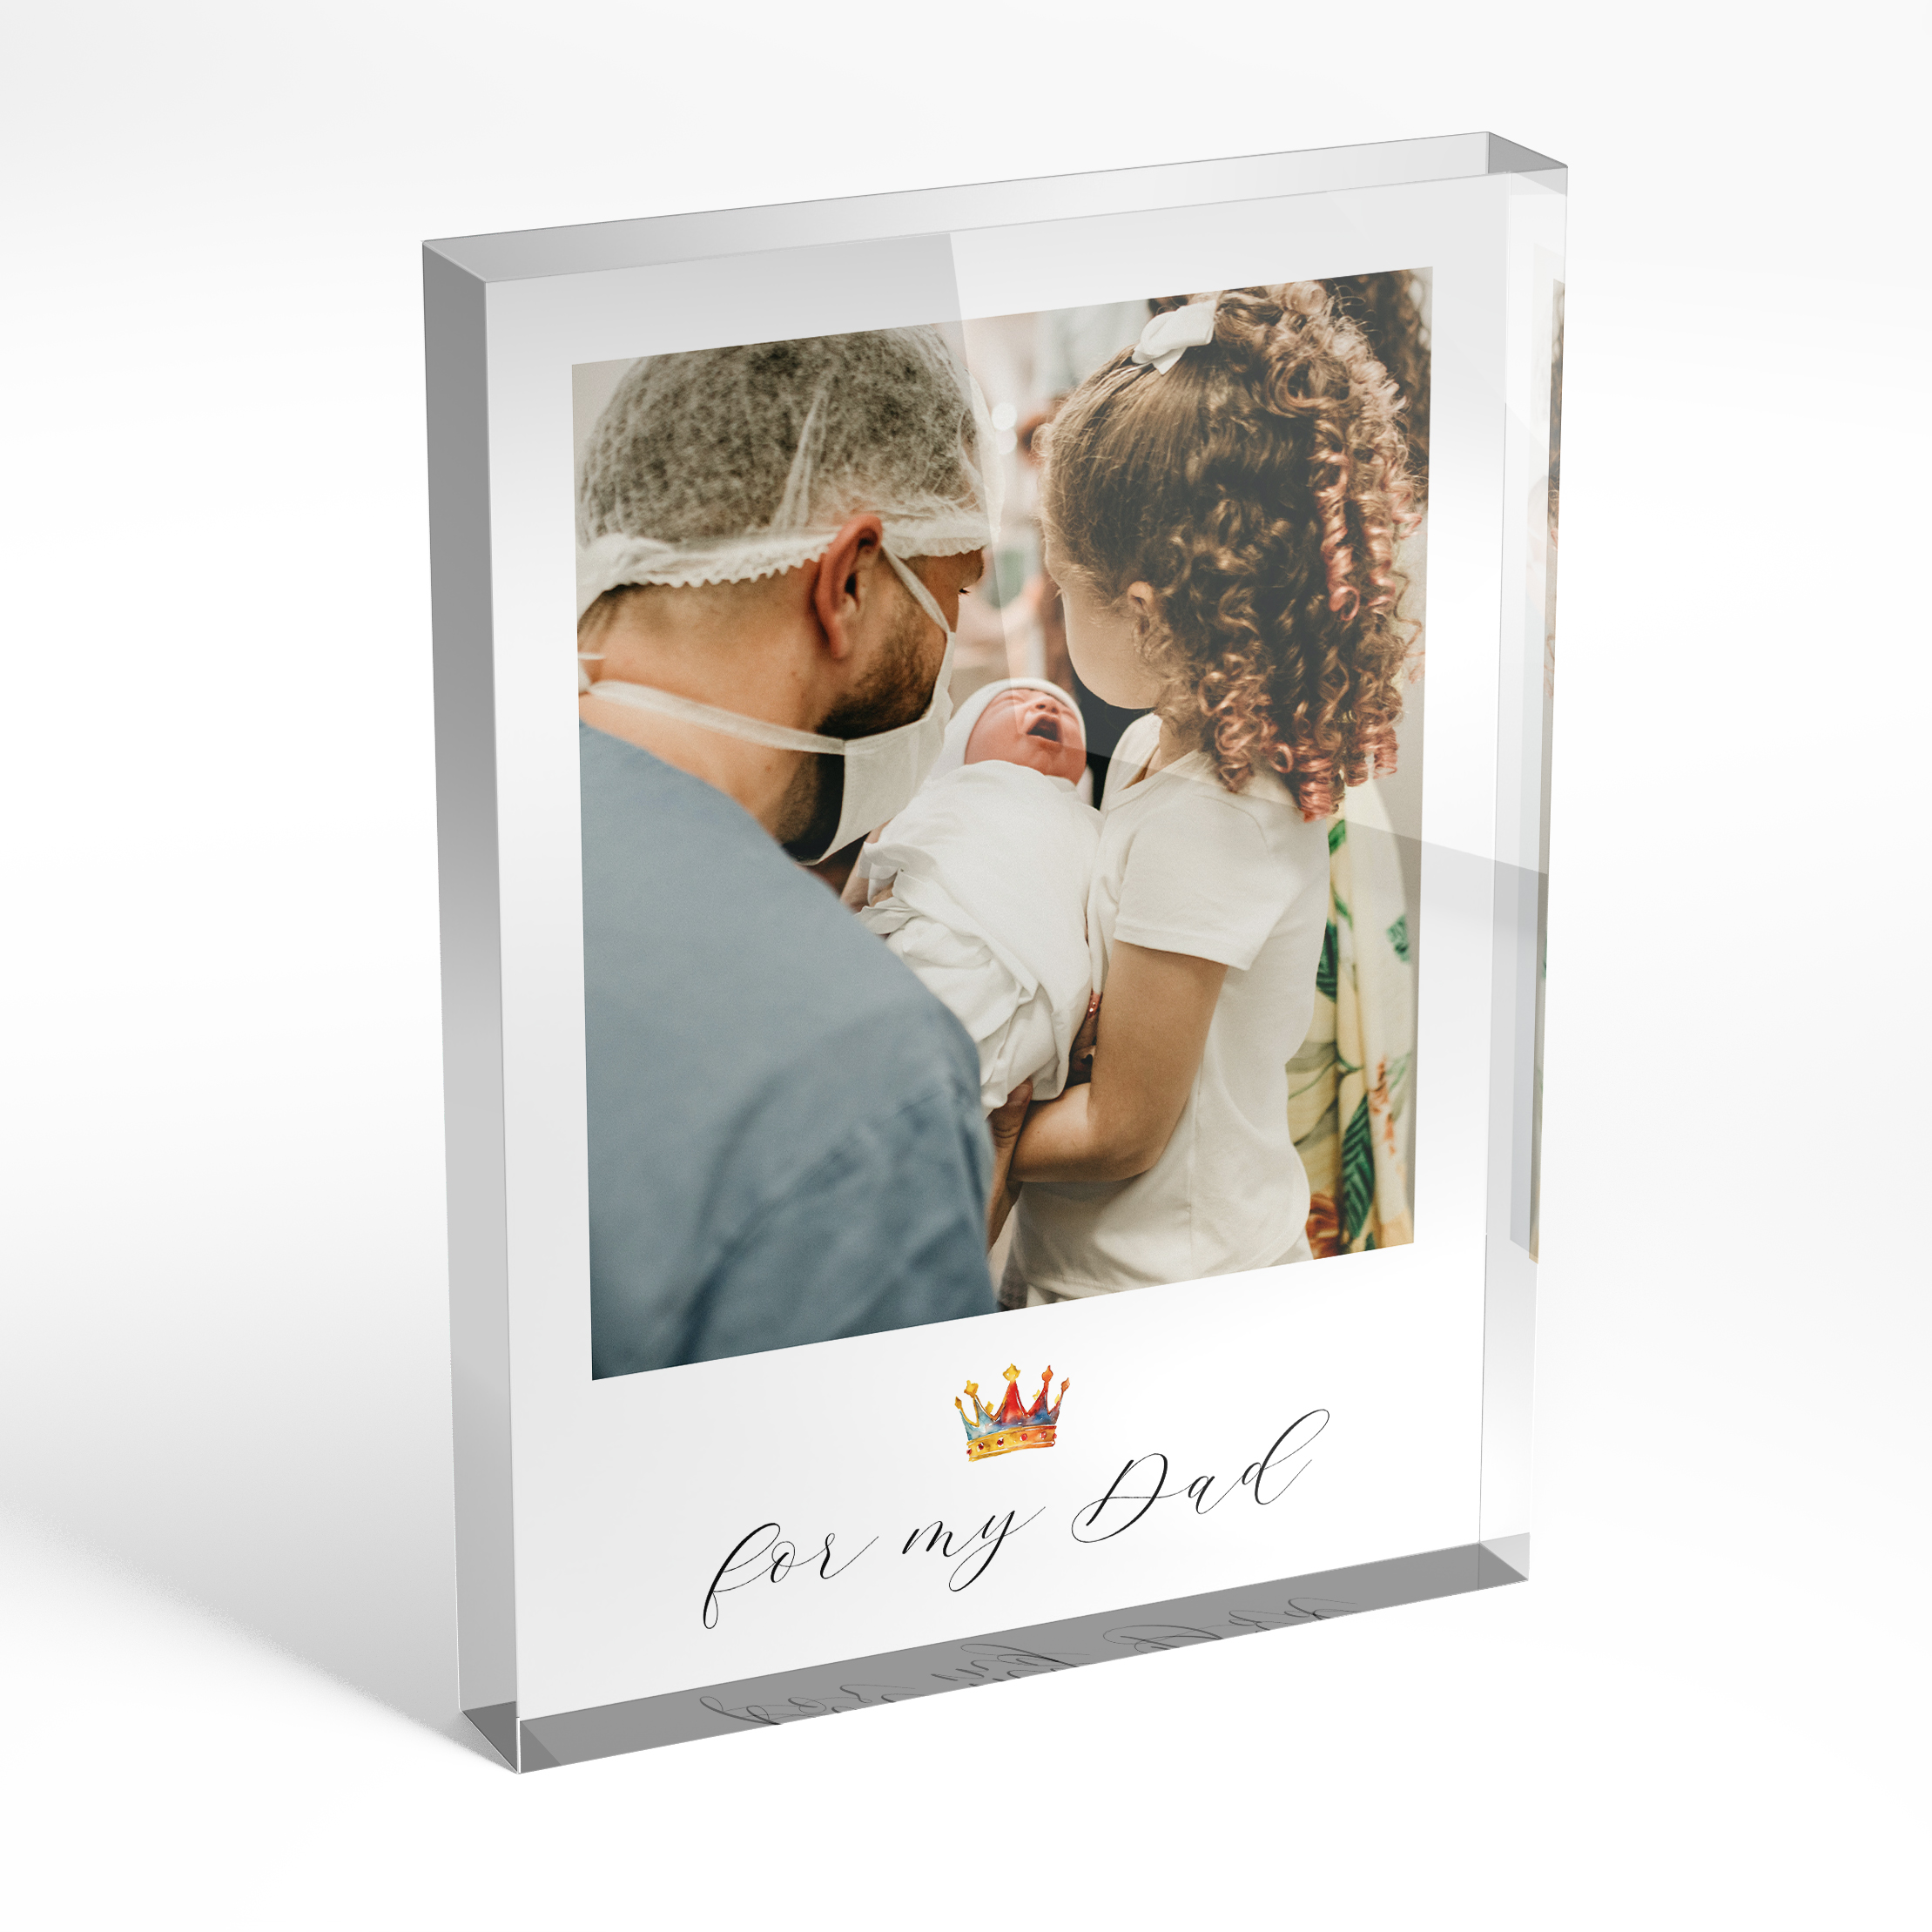 An angled side view of a portrait layout Acrylic Photo Block with space for 1 photo. Thiis design is named "King of the Dads". 